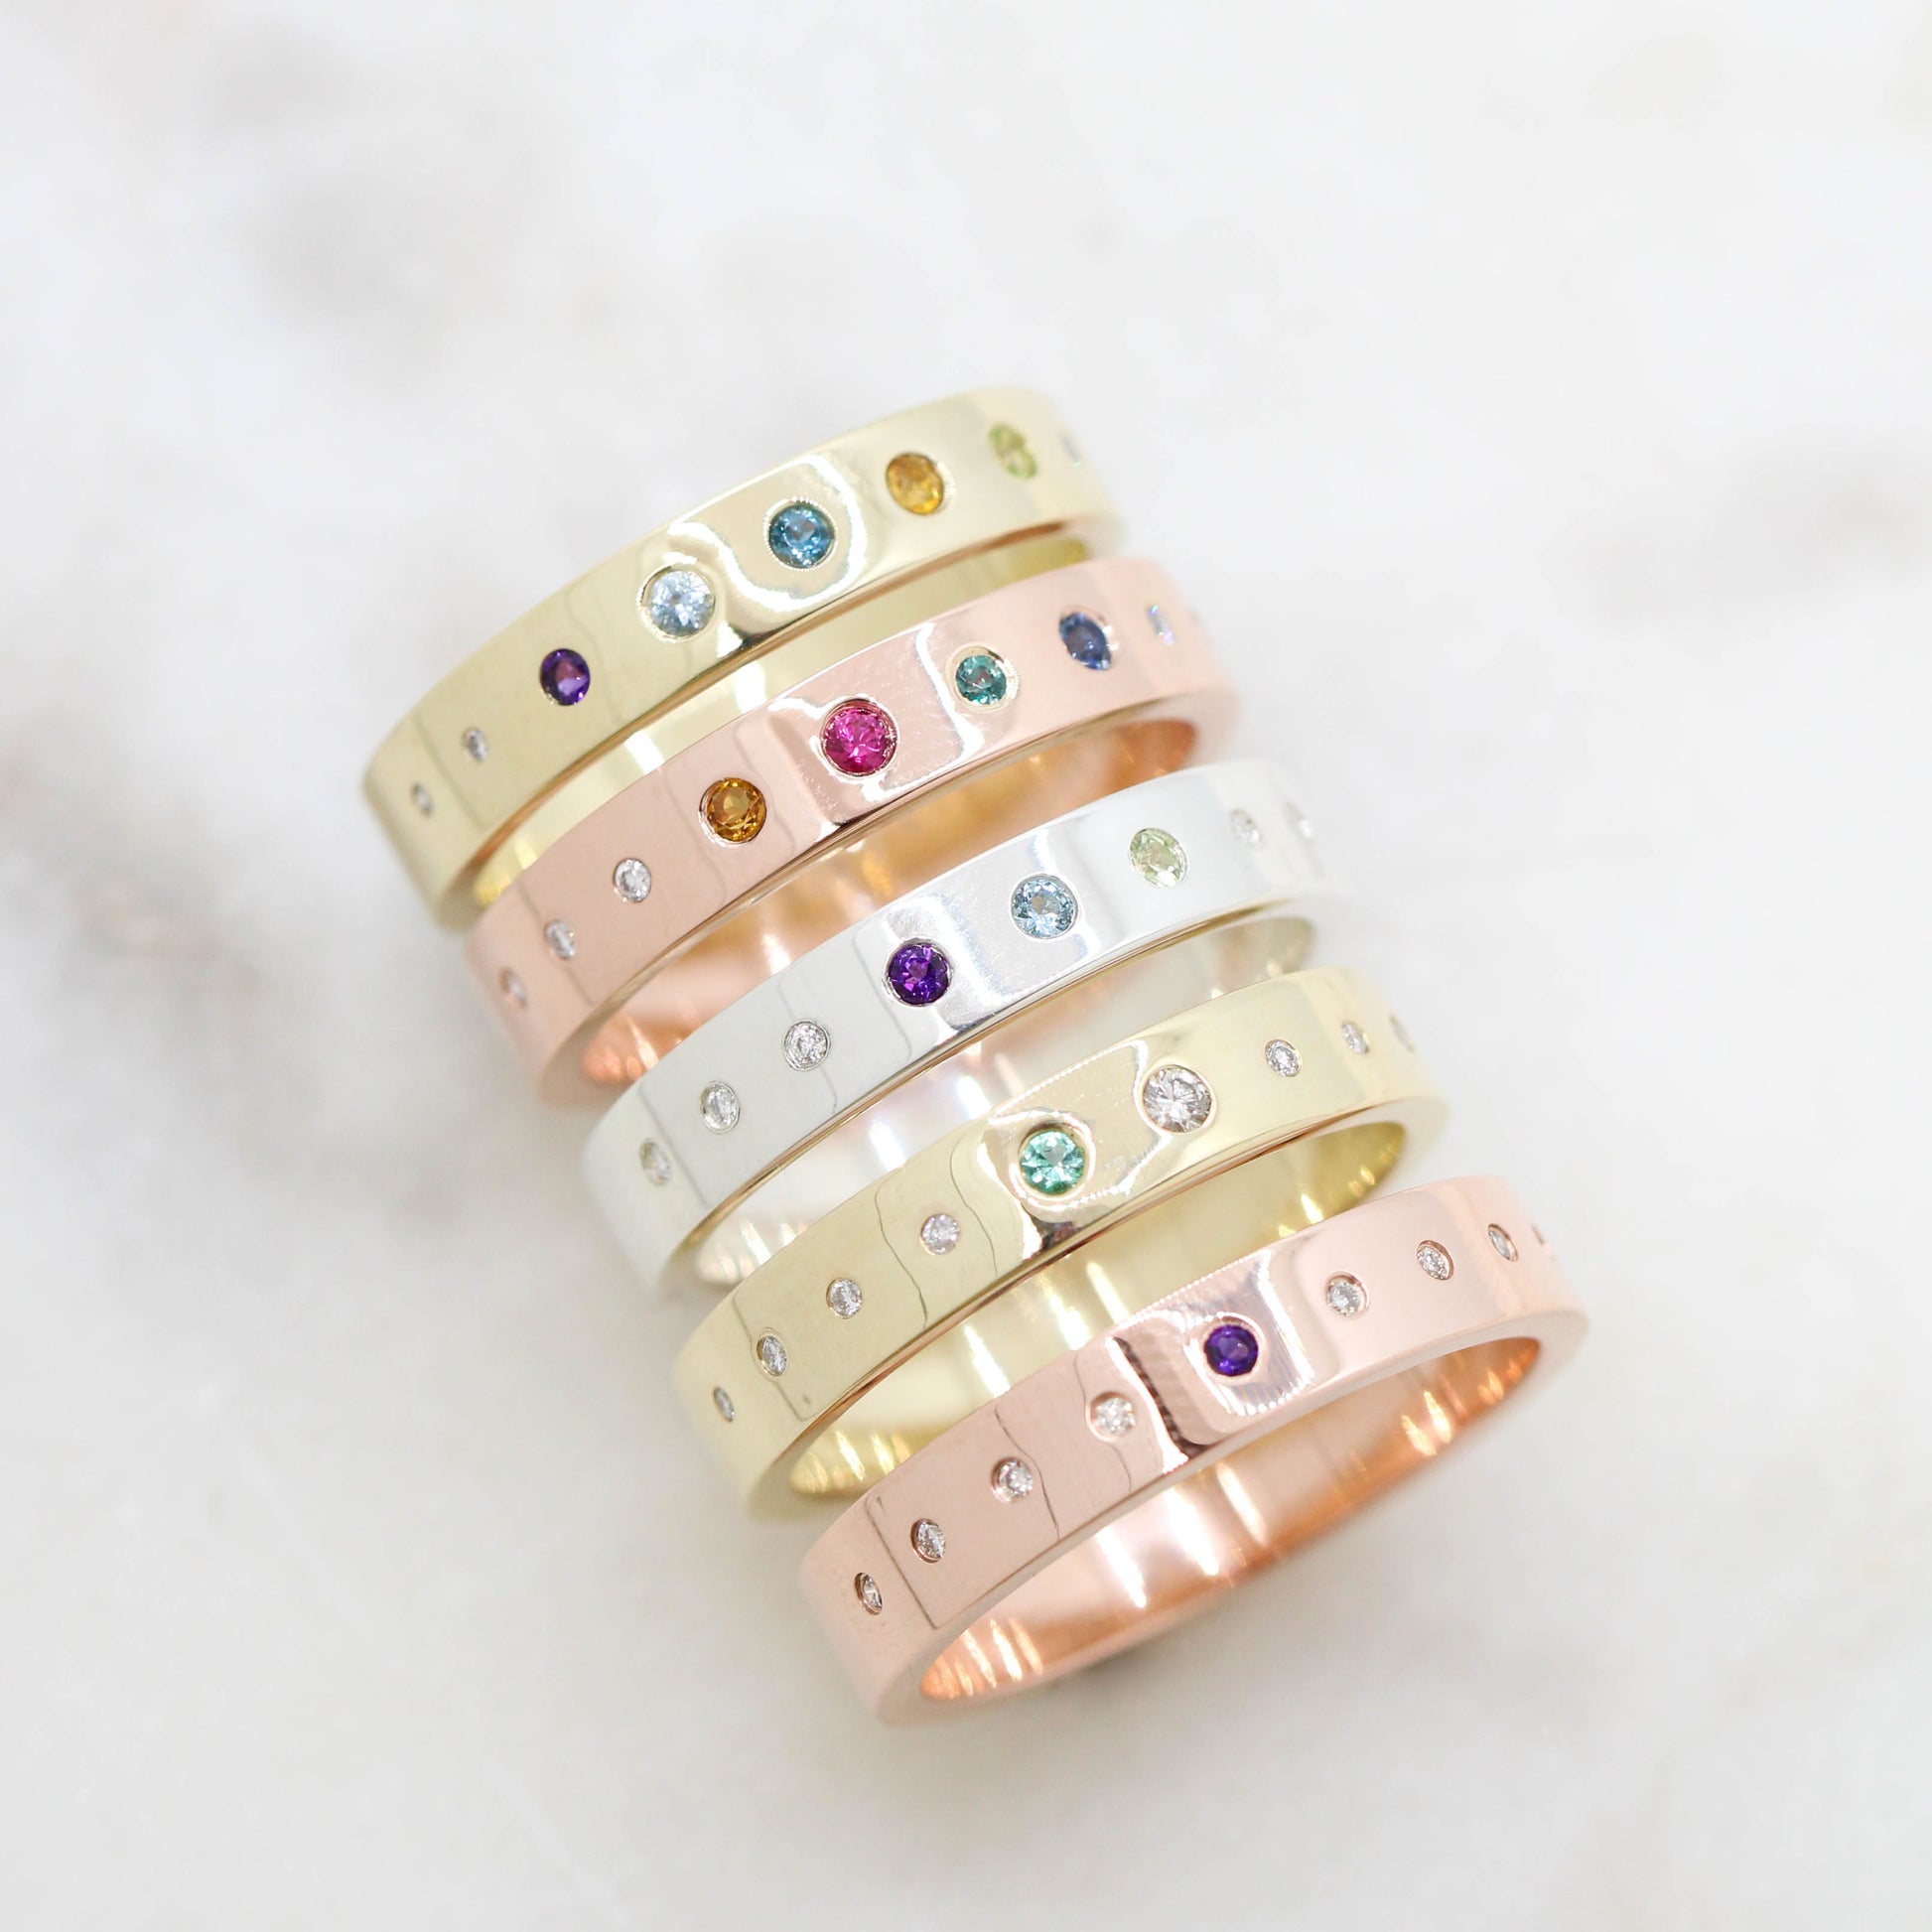 CAELEN(J) Birthstone Band - Your Choice of 14k Gold and Birthstone Type - Midwinter Co. Alternative Bridal Rings and Modern Fine Jewelry